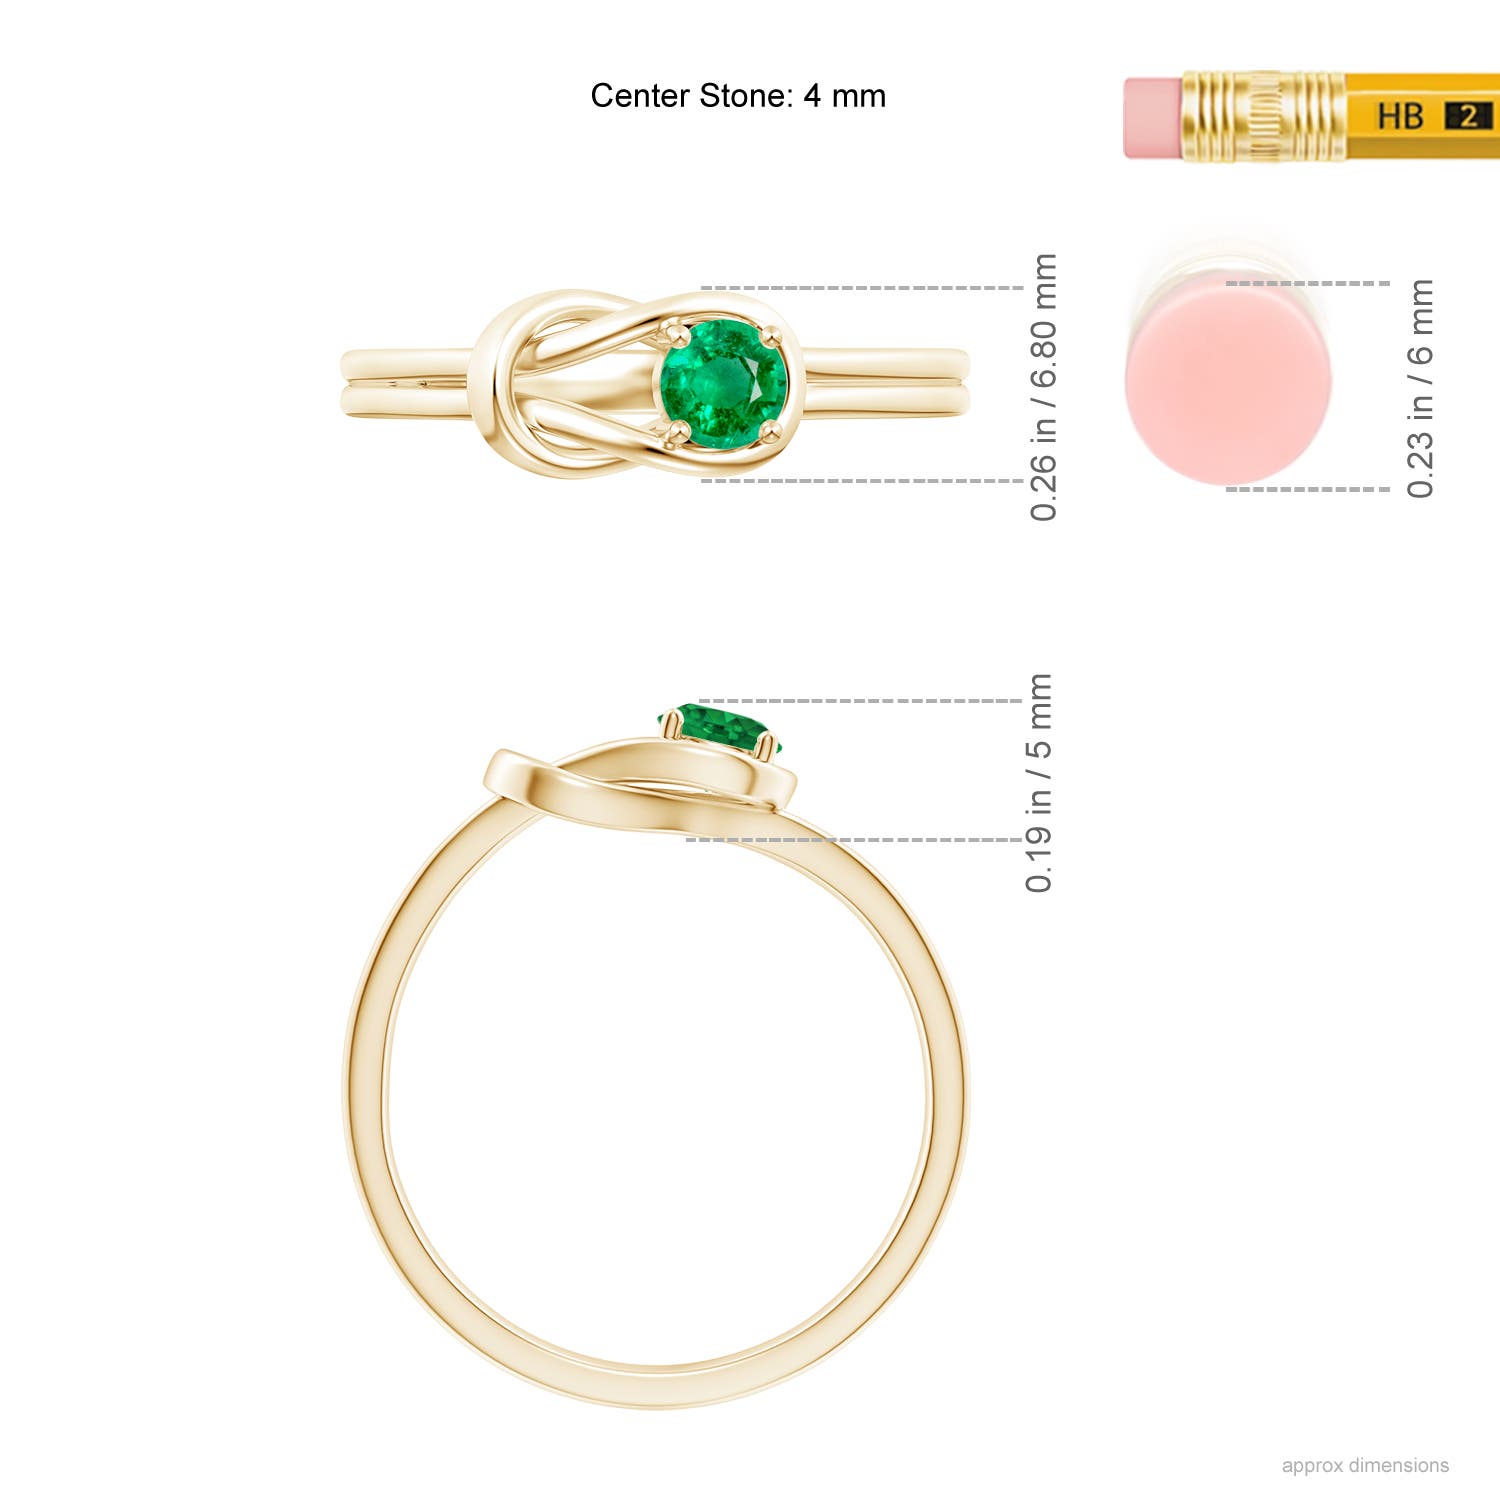 AAA - Emerald / 0.24 CT / 14 KT Yellow Gold